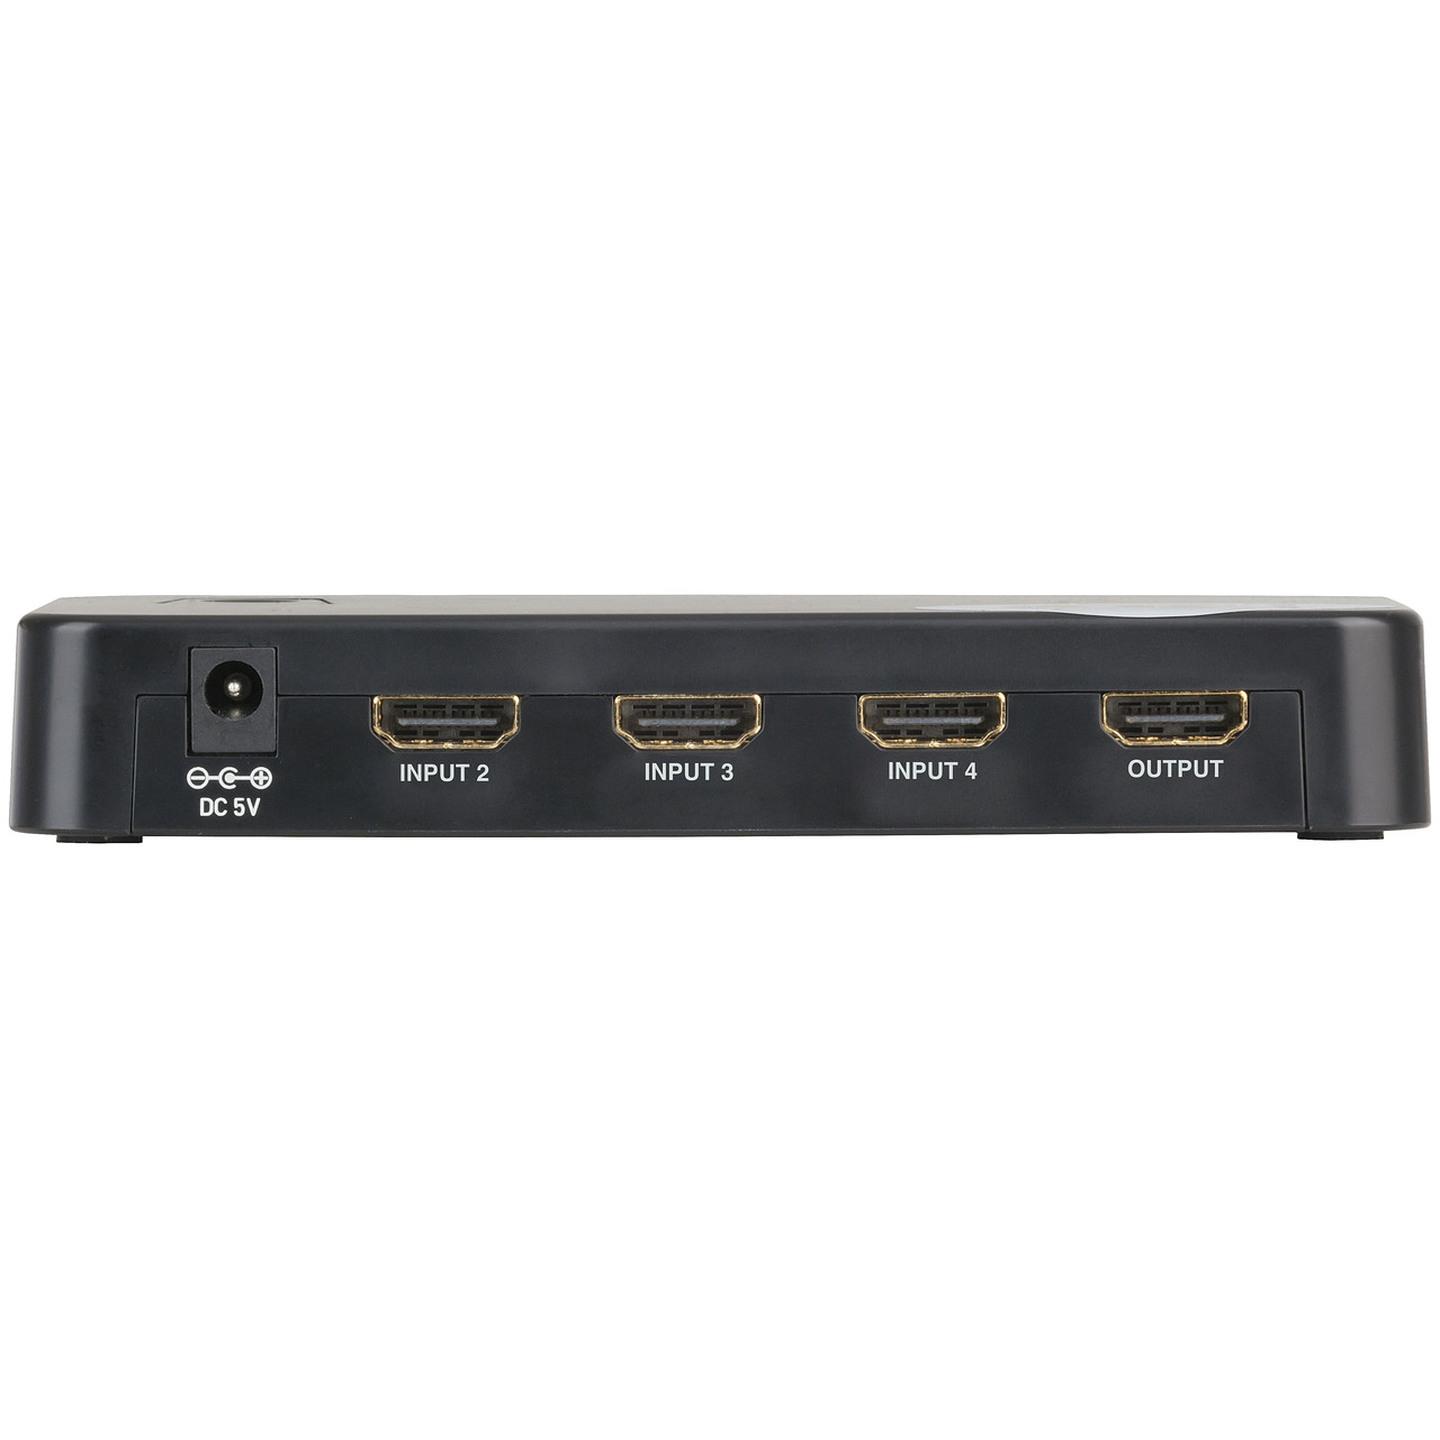 4 Input HDMI Switcher with MHL Input and PIP Function